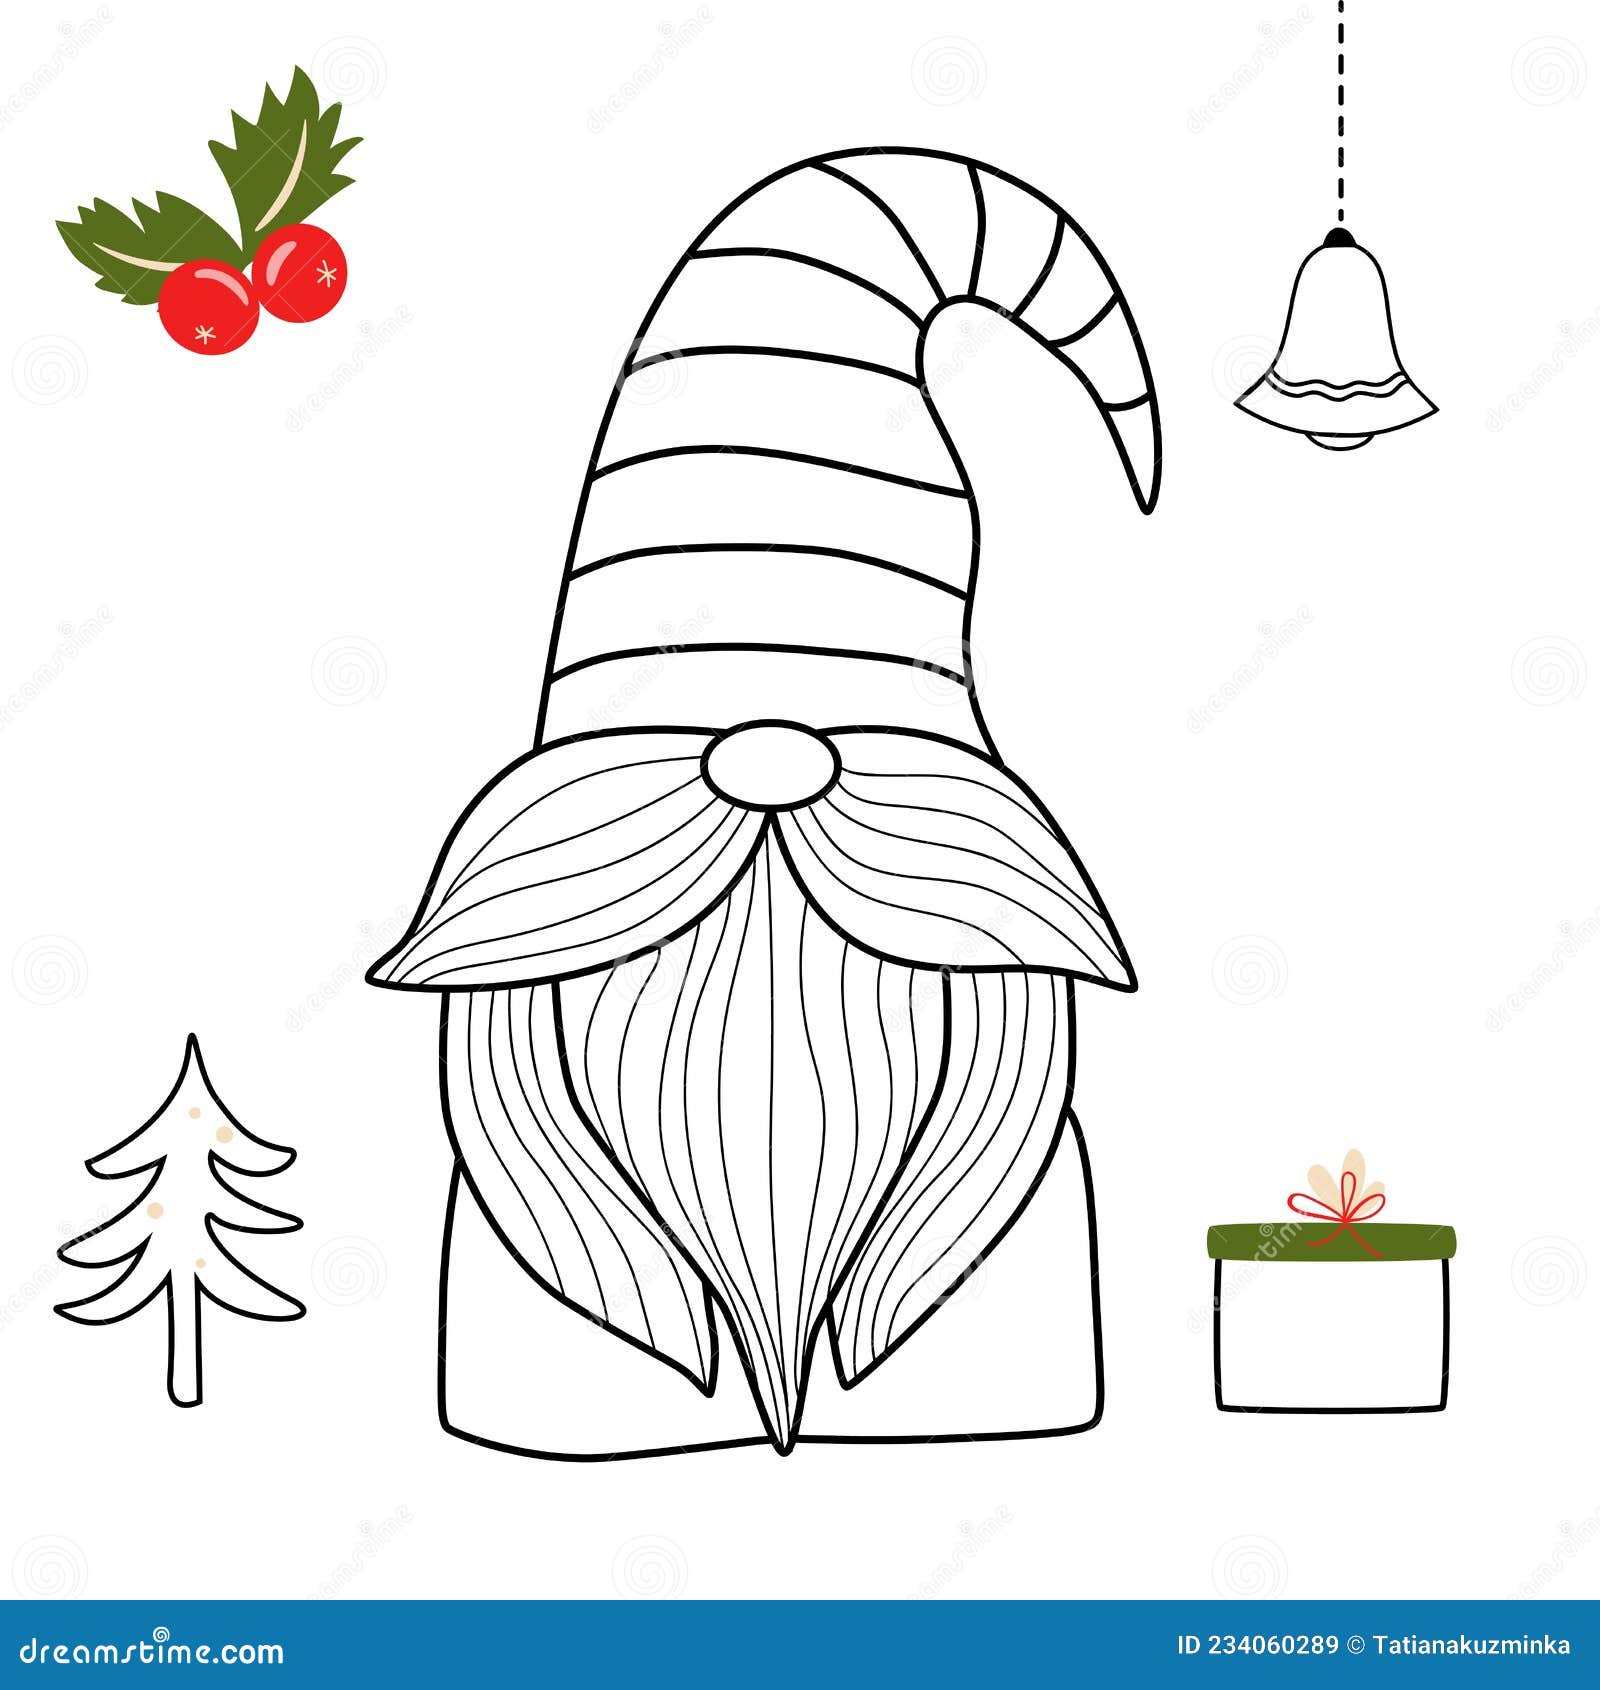 Gnome coloring pages stock illustrations â gnome coloring pages stock illustrations vectors clipart